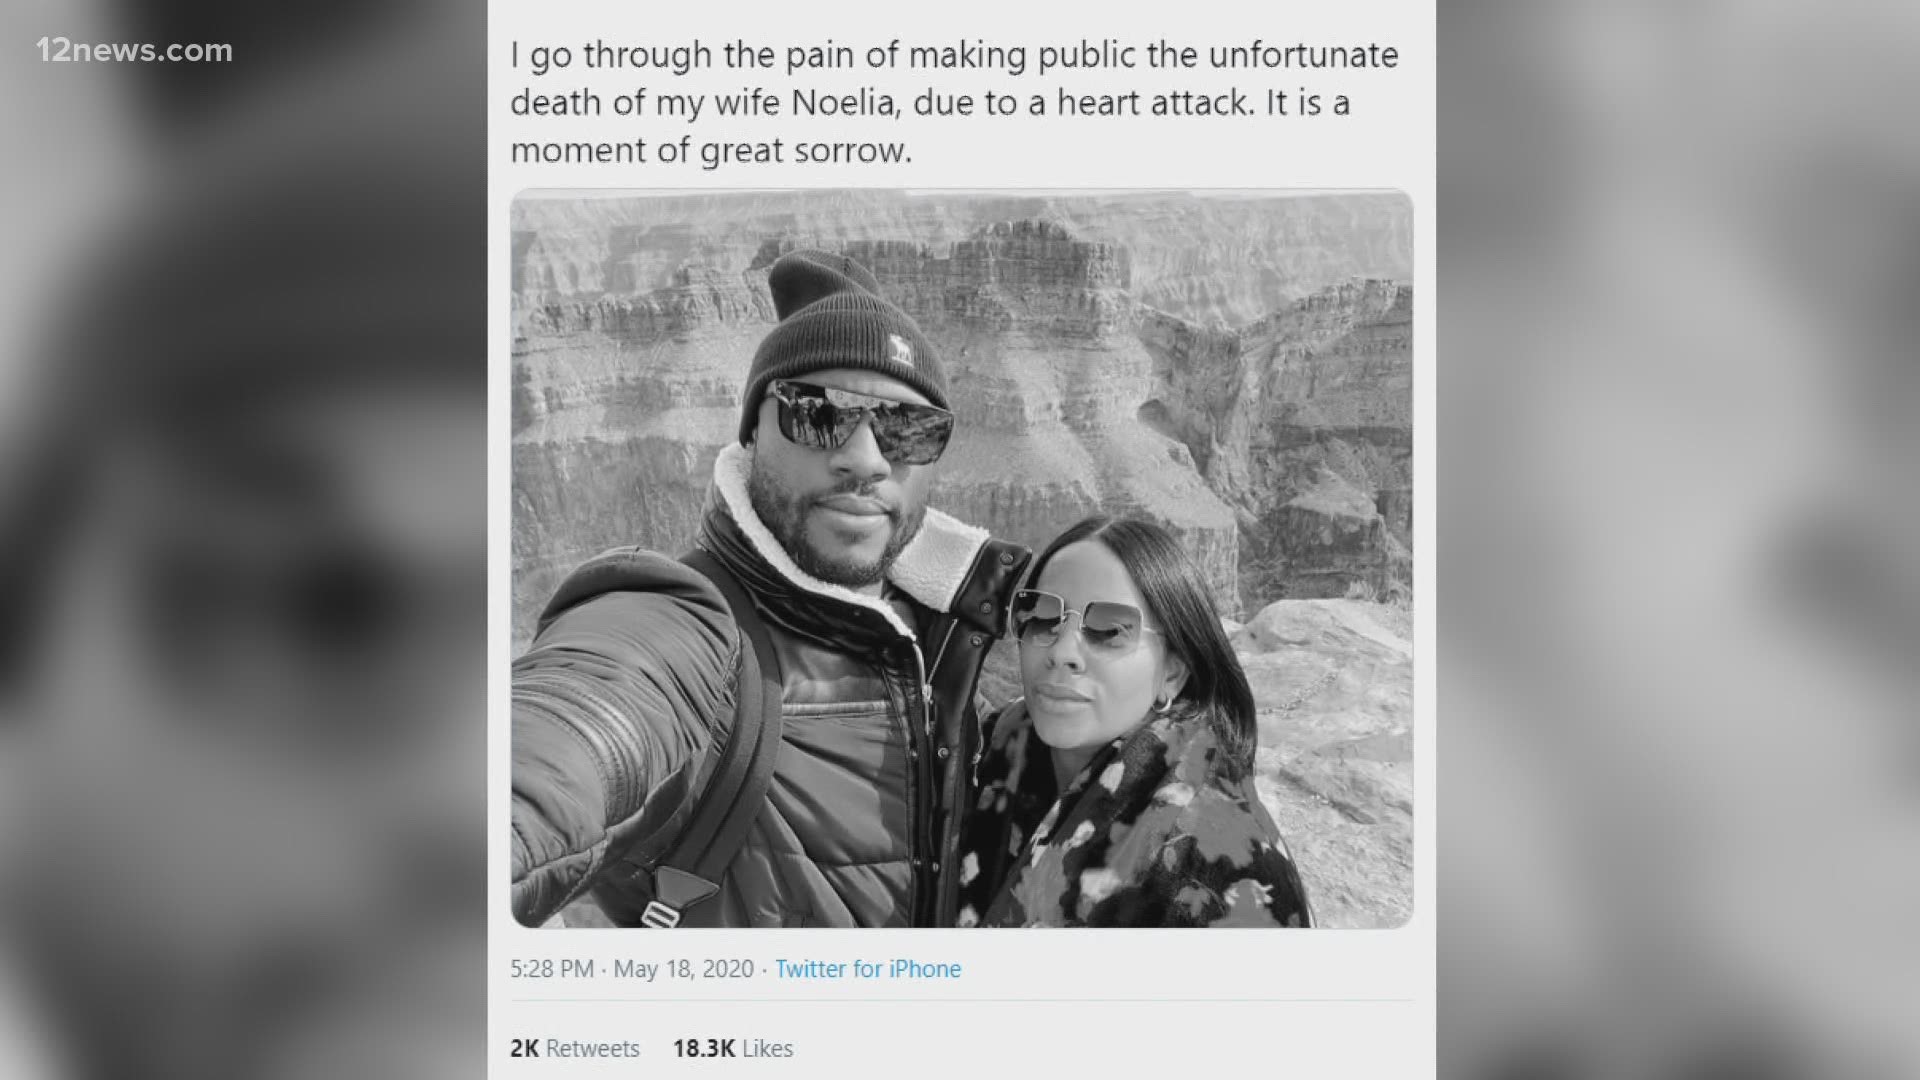 D-backs outfielder Starling Marte announces his wife Noelia died